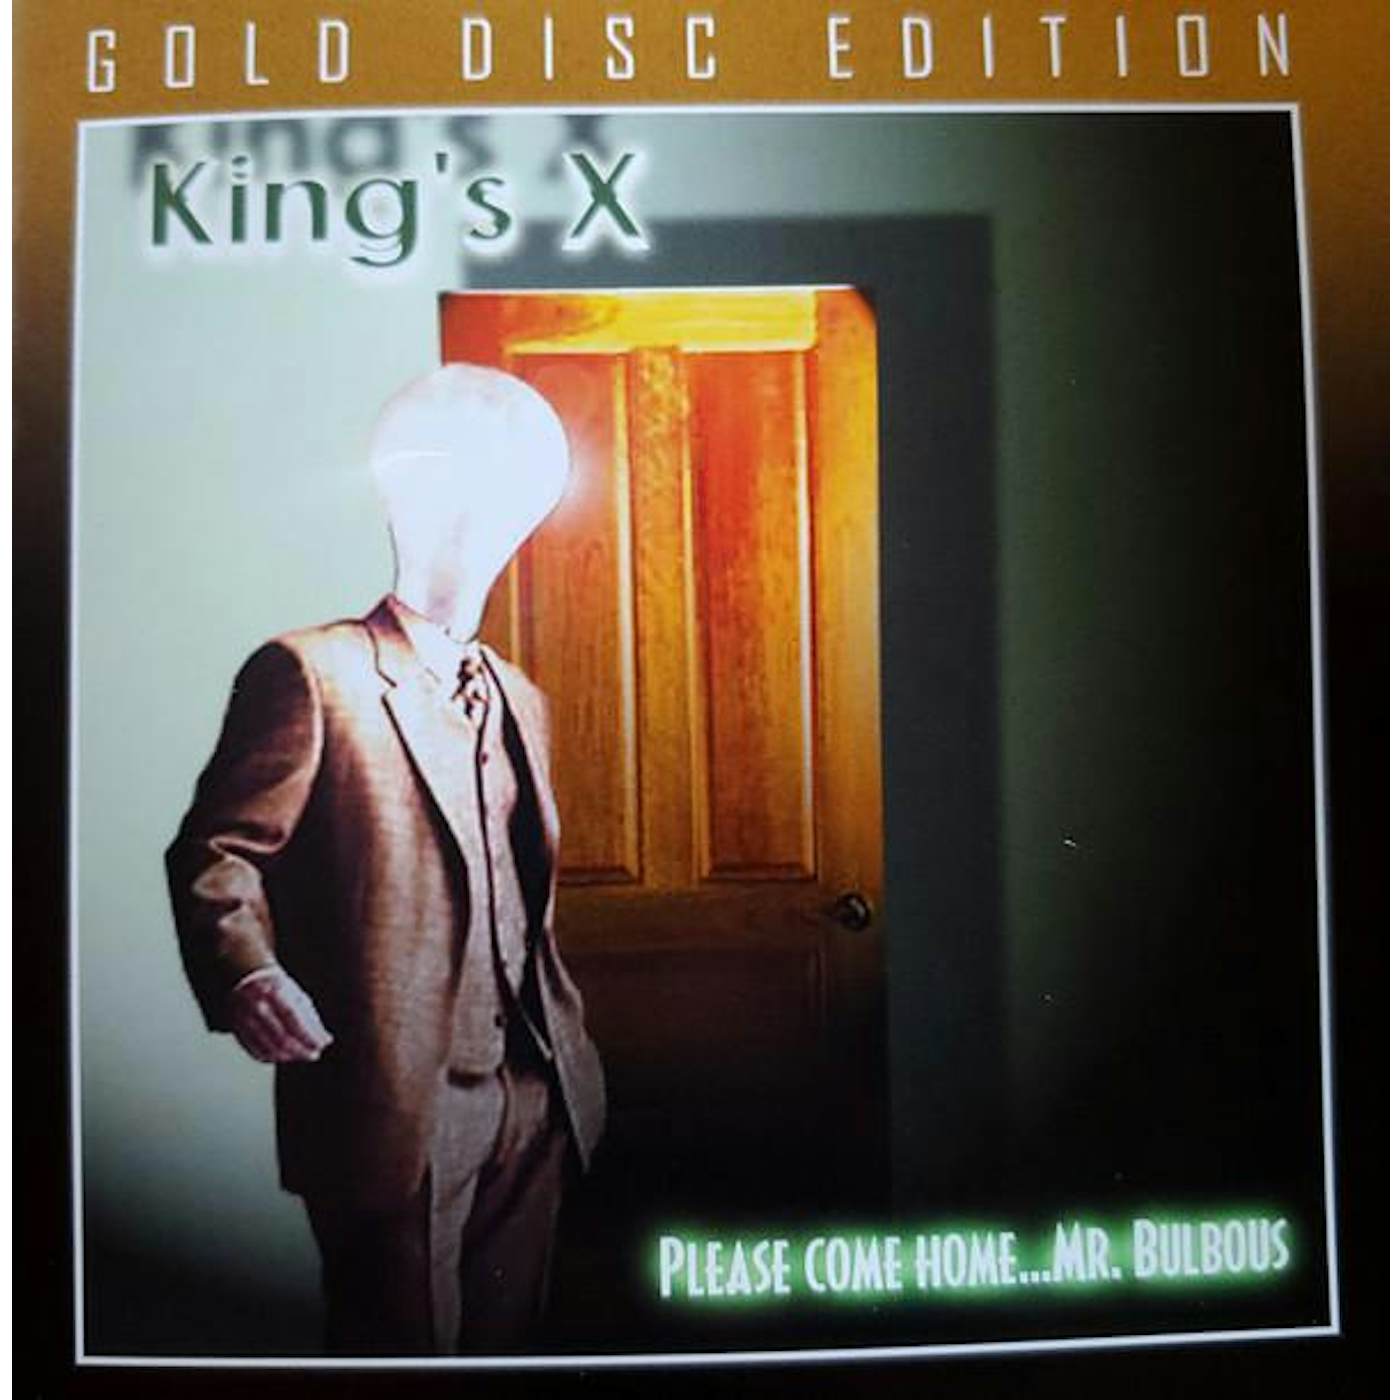 King's X WELCOME HOME…MR. BULBOUS (GOLD DISC EDITION) CD